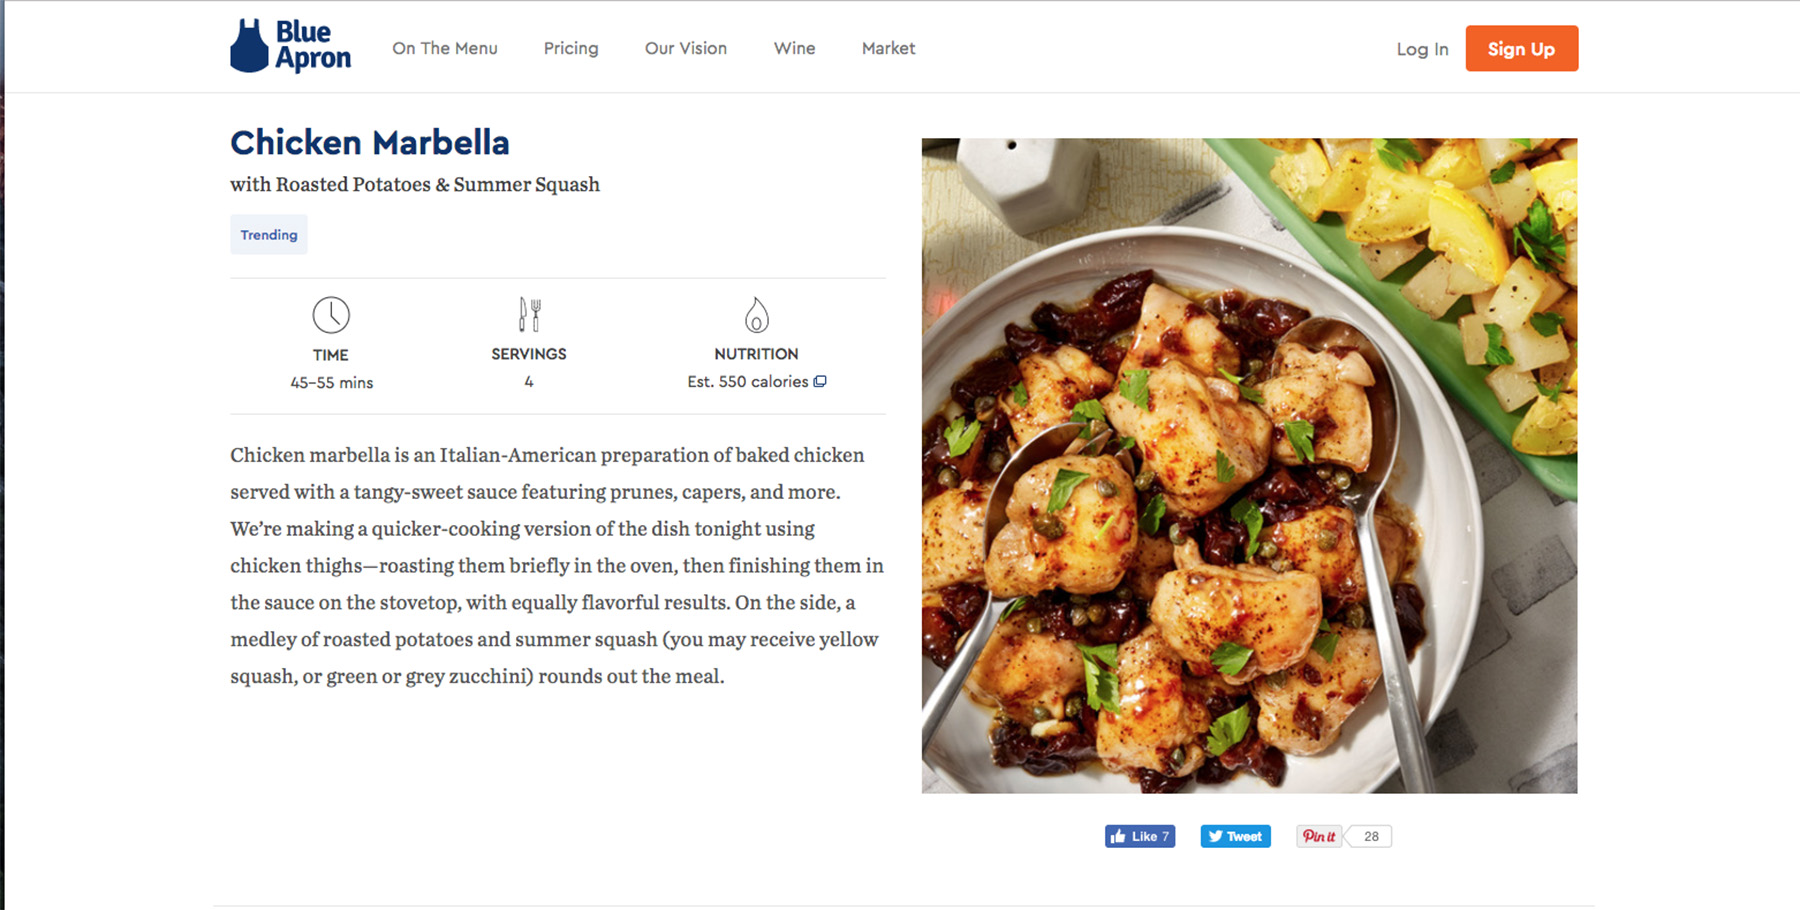 PHOTO: "GMA" ordered the Chicken Marbella meal from Blue Apron.   